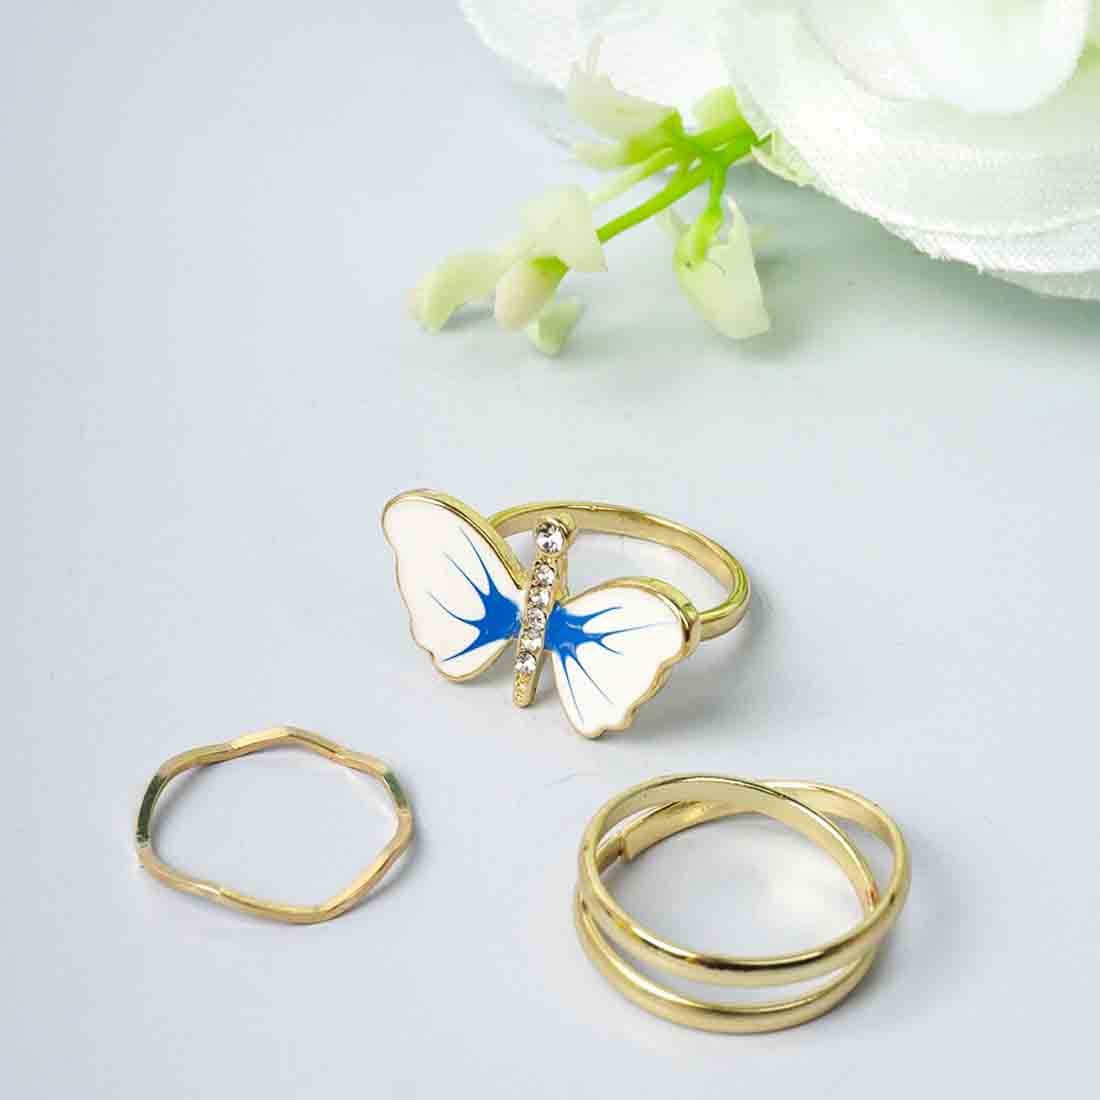 White Butterfly Ring Set